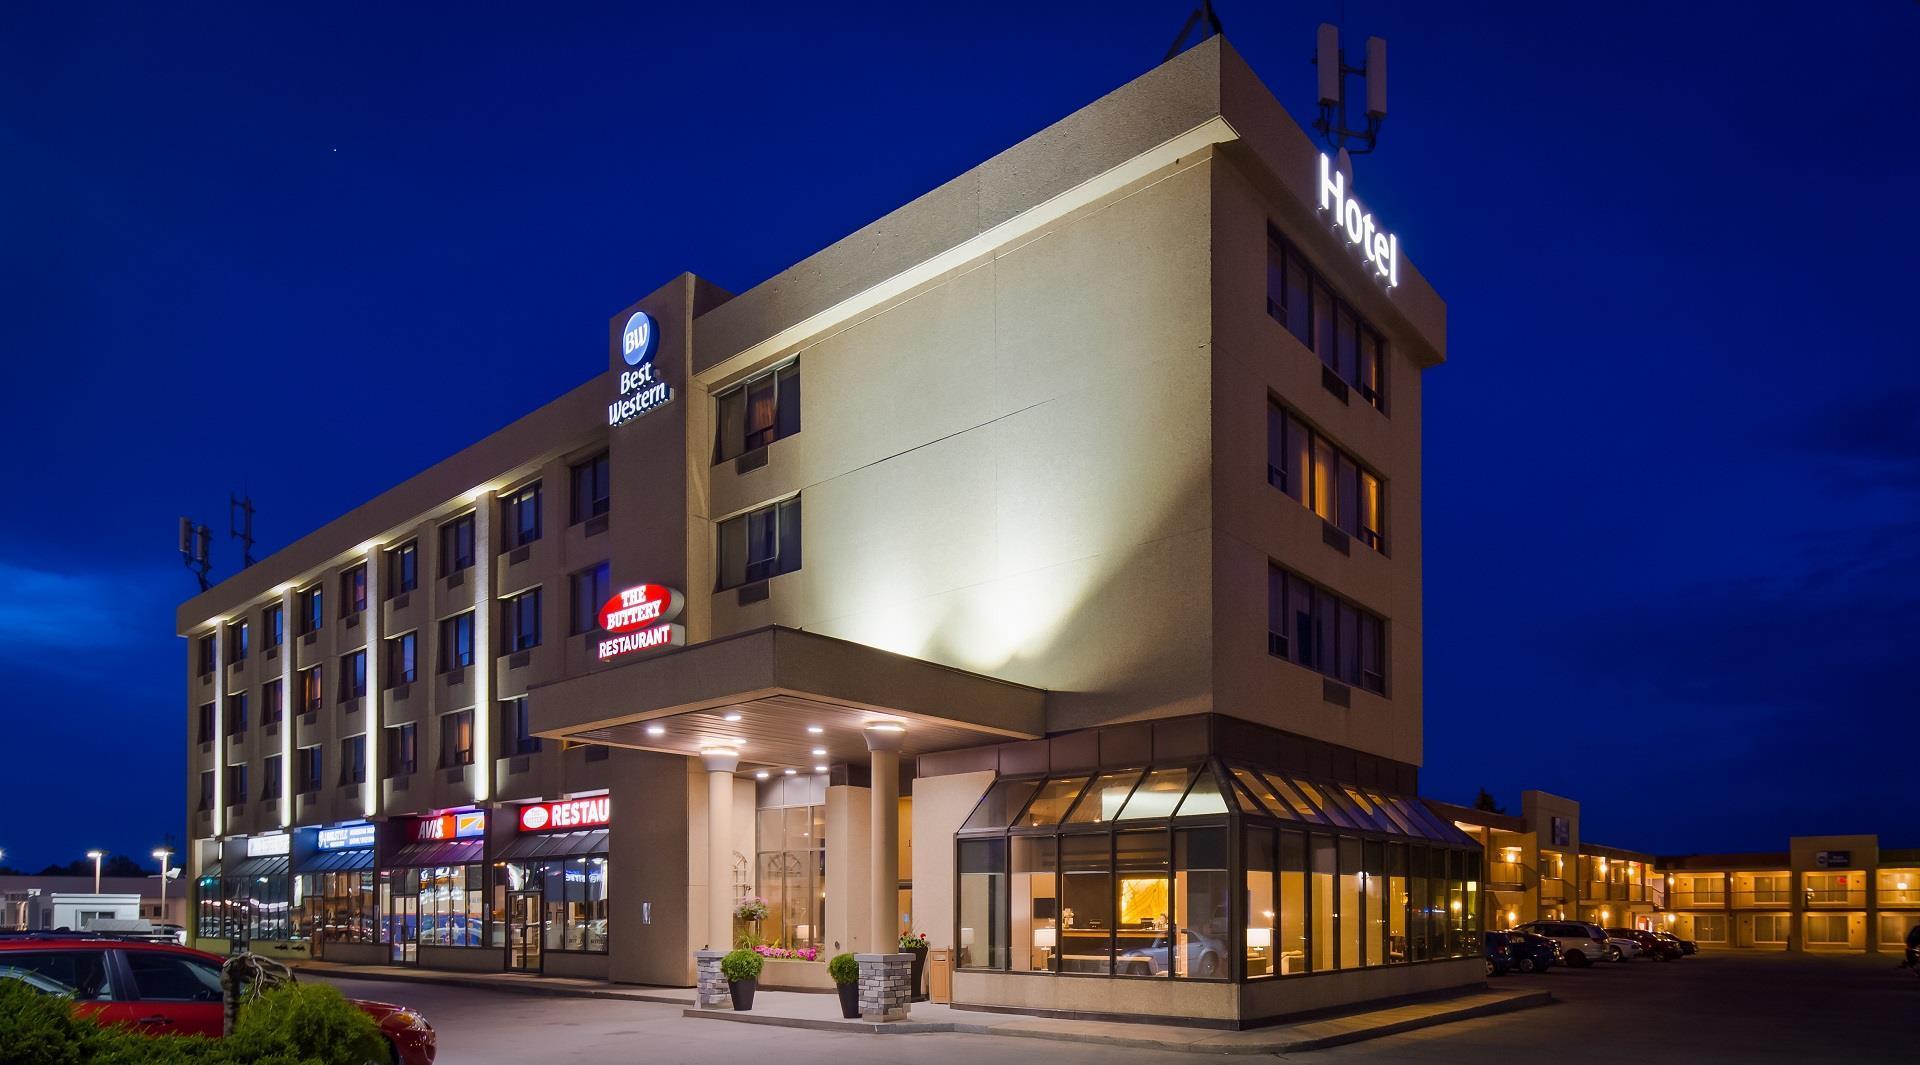 Best Western Voyageur Place Hotel in Newmarket, ON